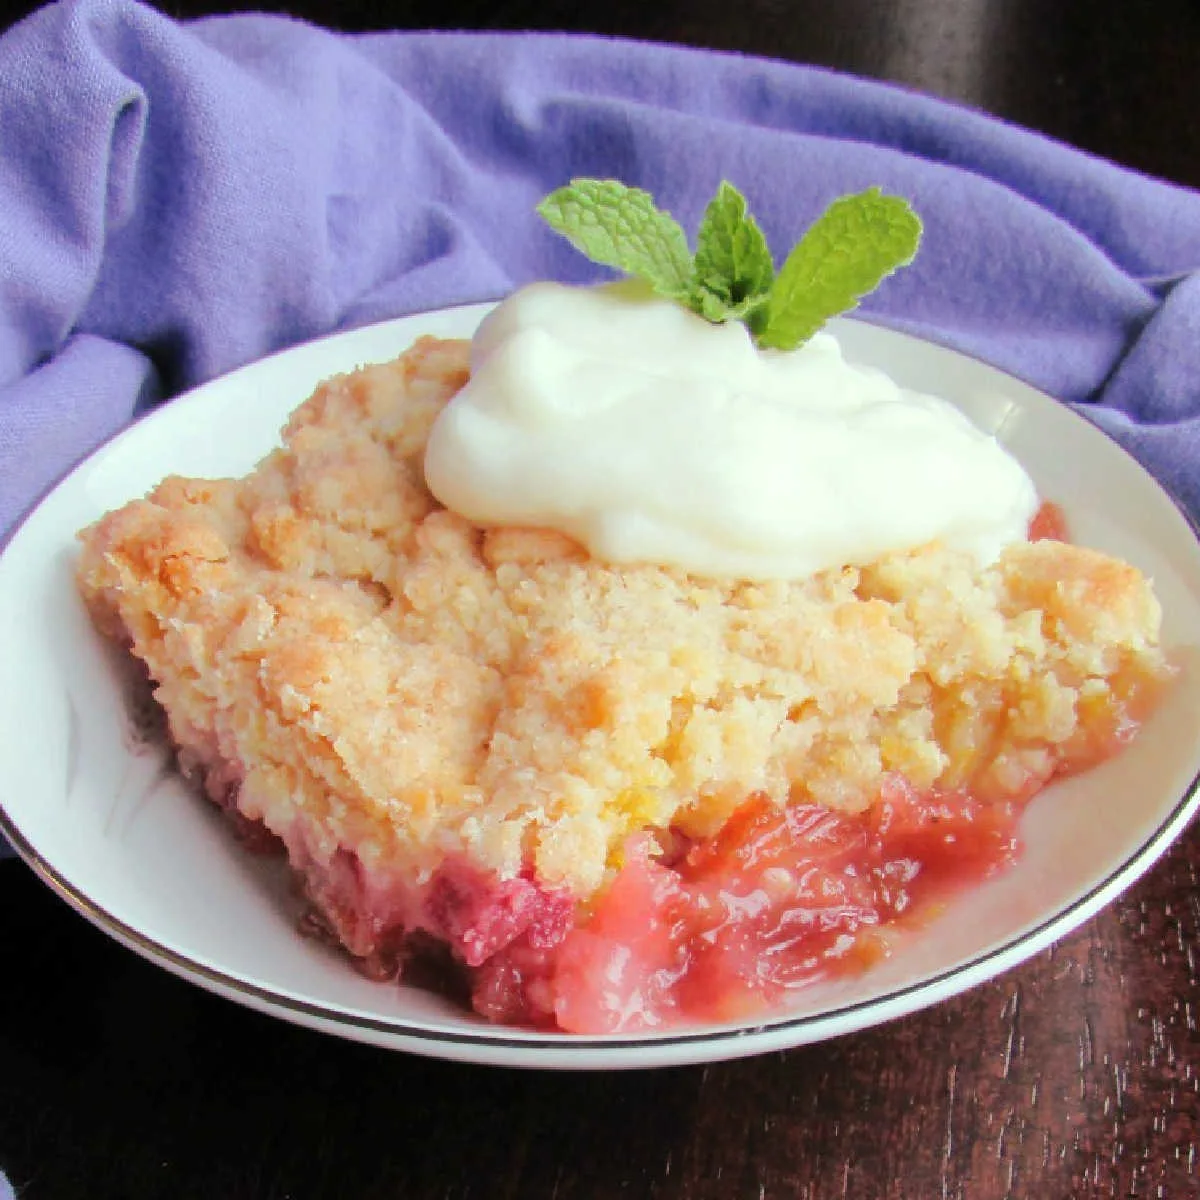 Small bowl with piece of rhubarb crunch showing pink layer topped with golden buttery crumb topping with a dollop of yogurt and sprig of mint on top.